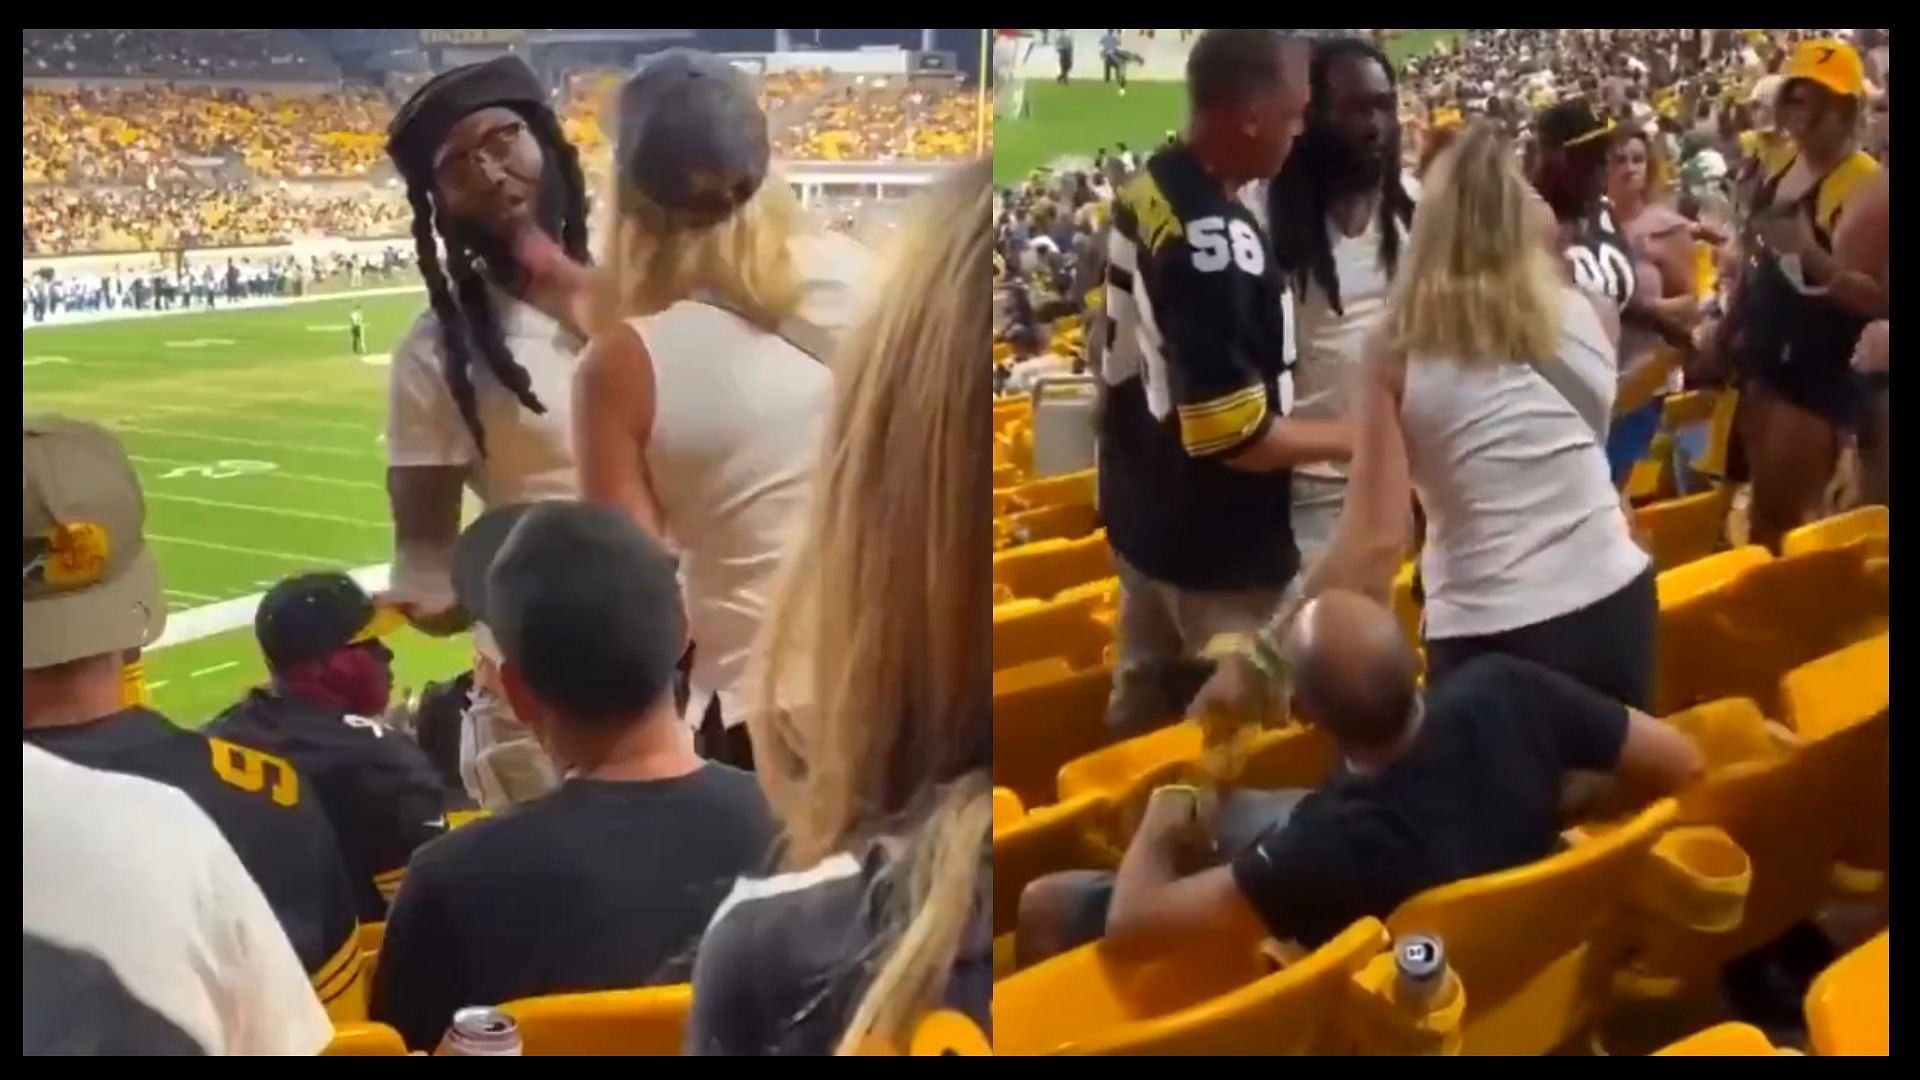 Slaps man and a woman at sports stadium game beat up video goes viral on social media